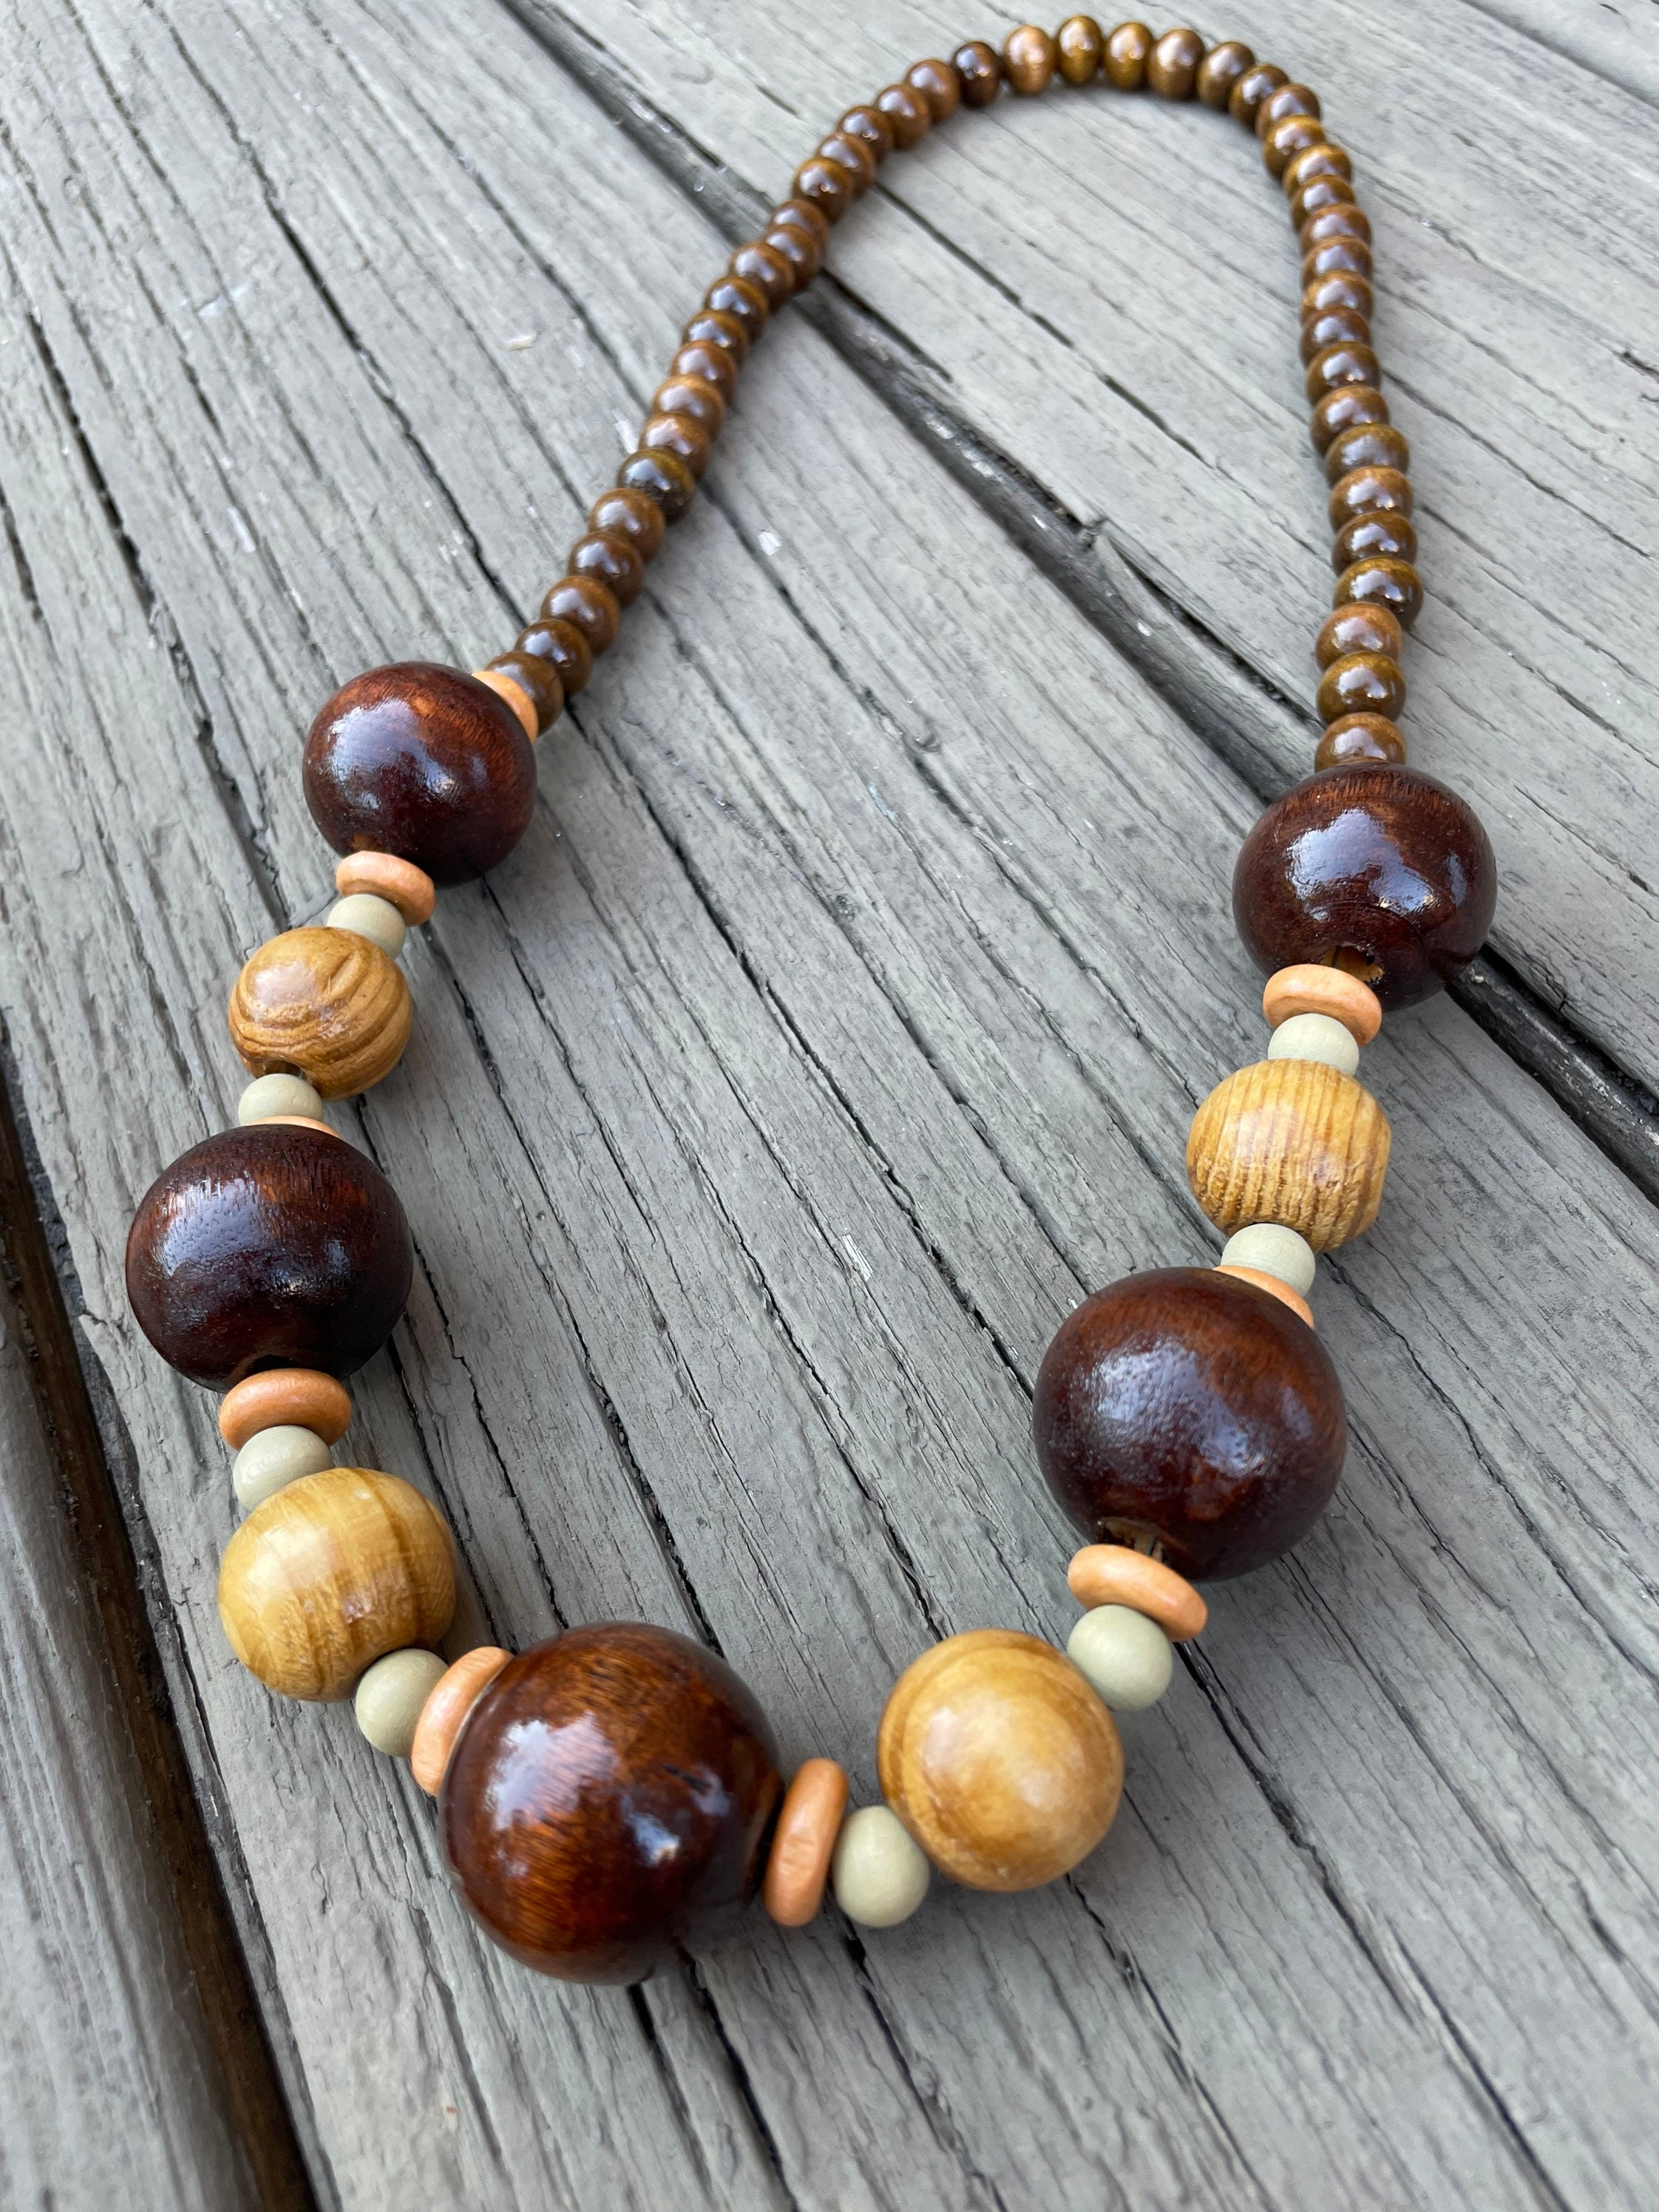 Dyed Wood Bead necklace tutorial from Martha Stewart - J. Conlon and Sons | Wood  bead necklace diy, Wood beads jewelry, Large bead necklace